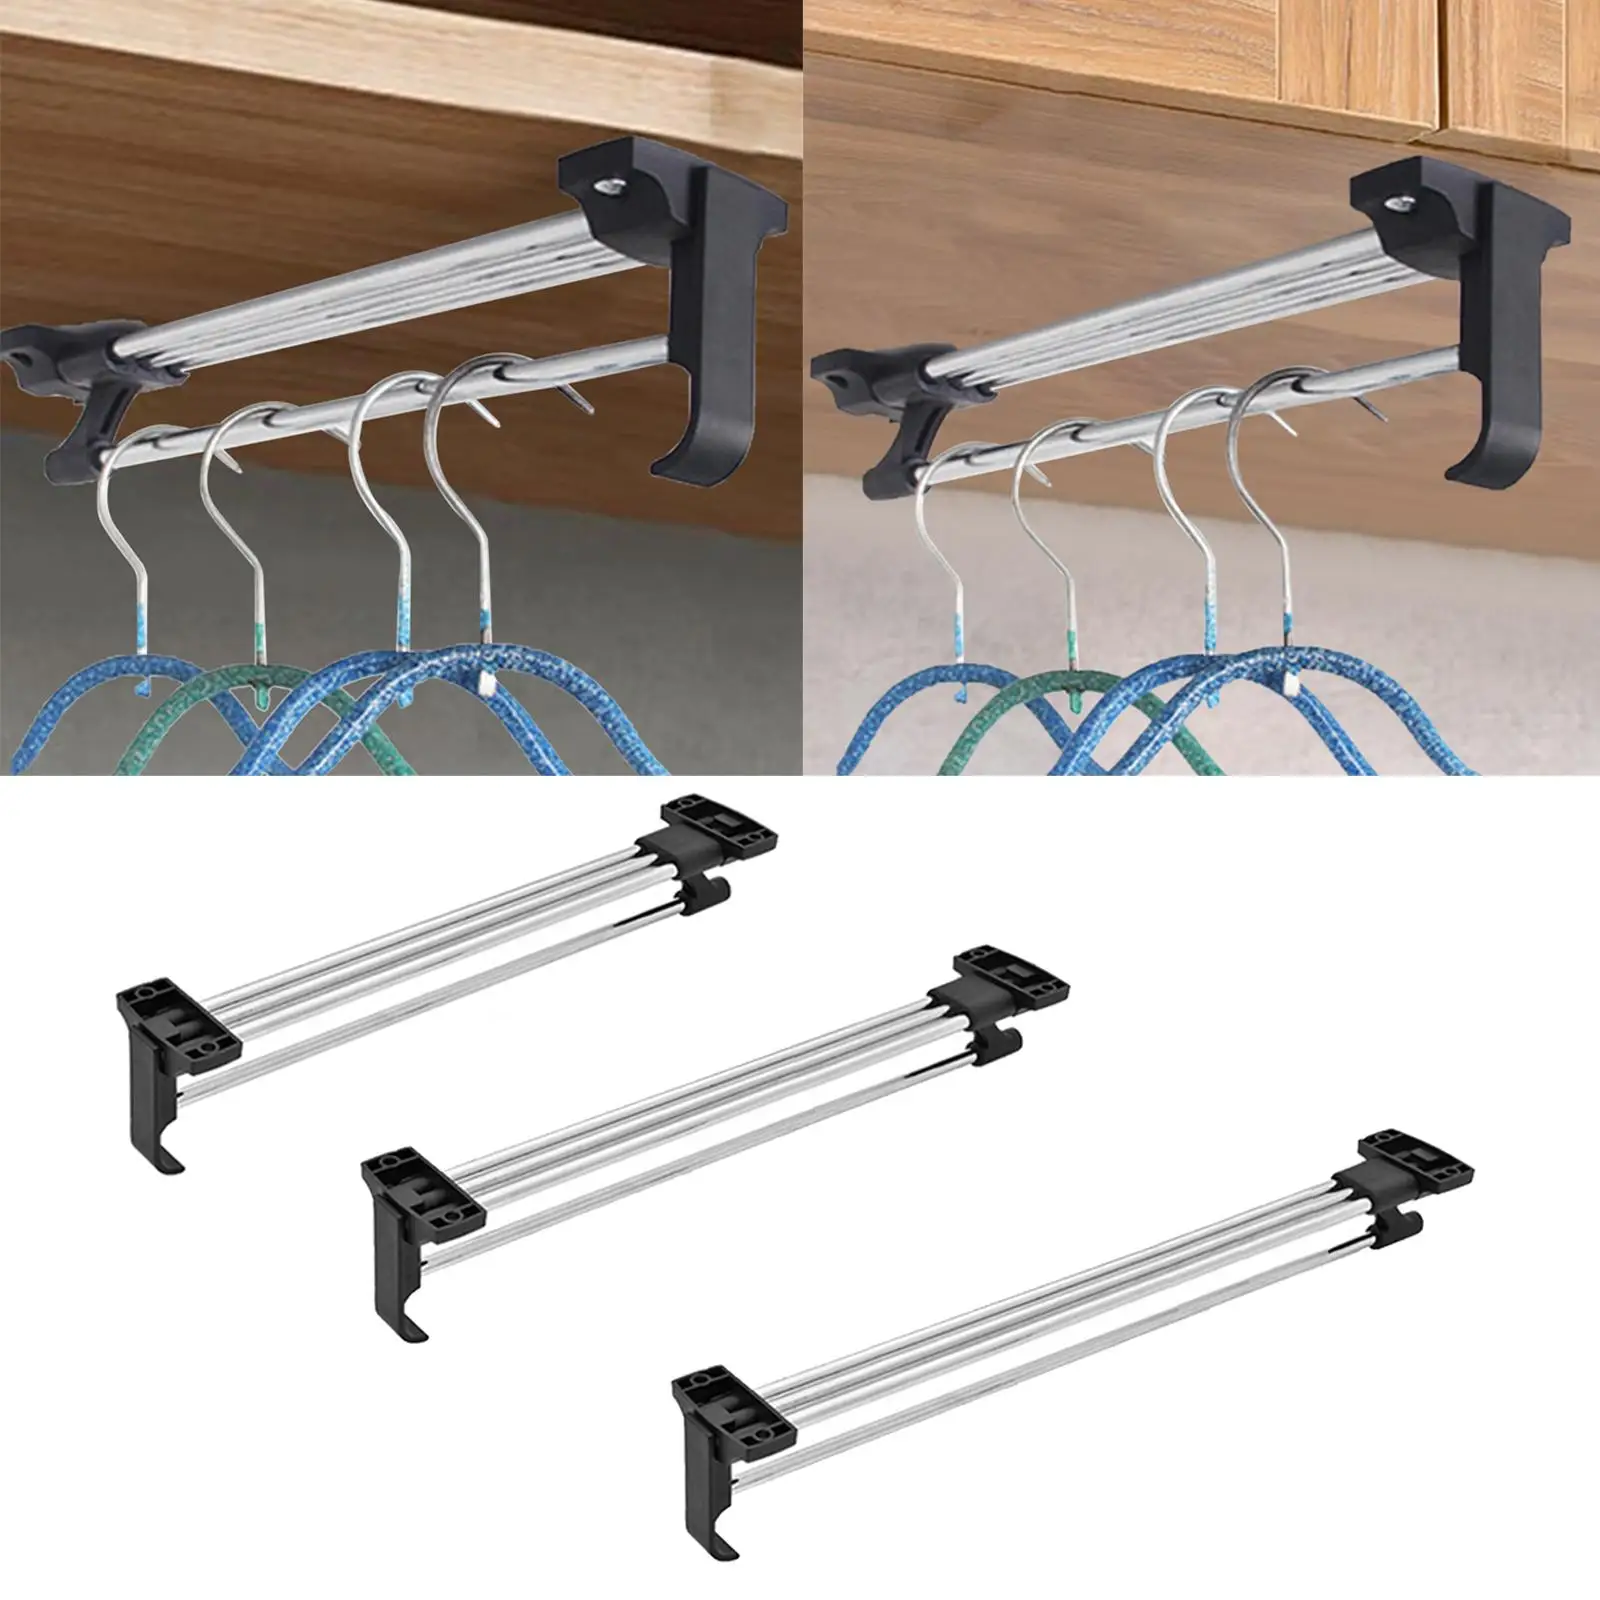 Multipurpose Telescopic Clothing Rod Clothes Drying Rack Support Rod Tension Rod Clothes Hanger for Bedroom Closet Bathroom Home